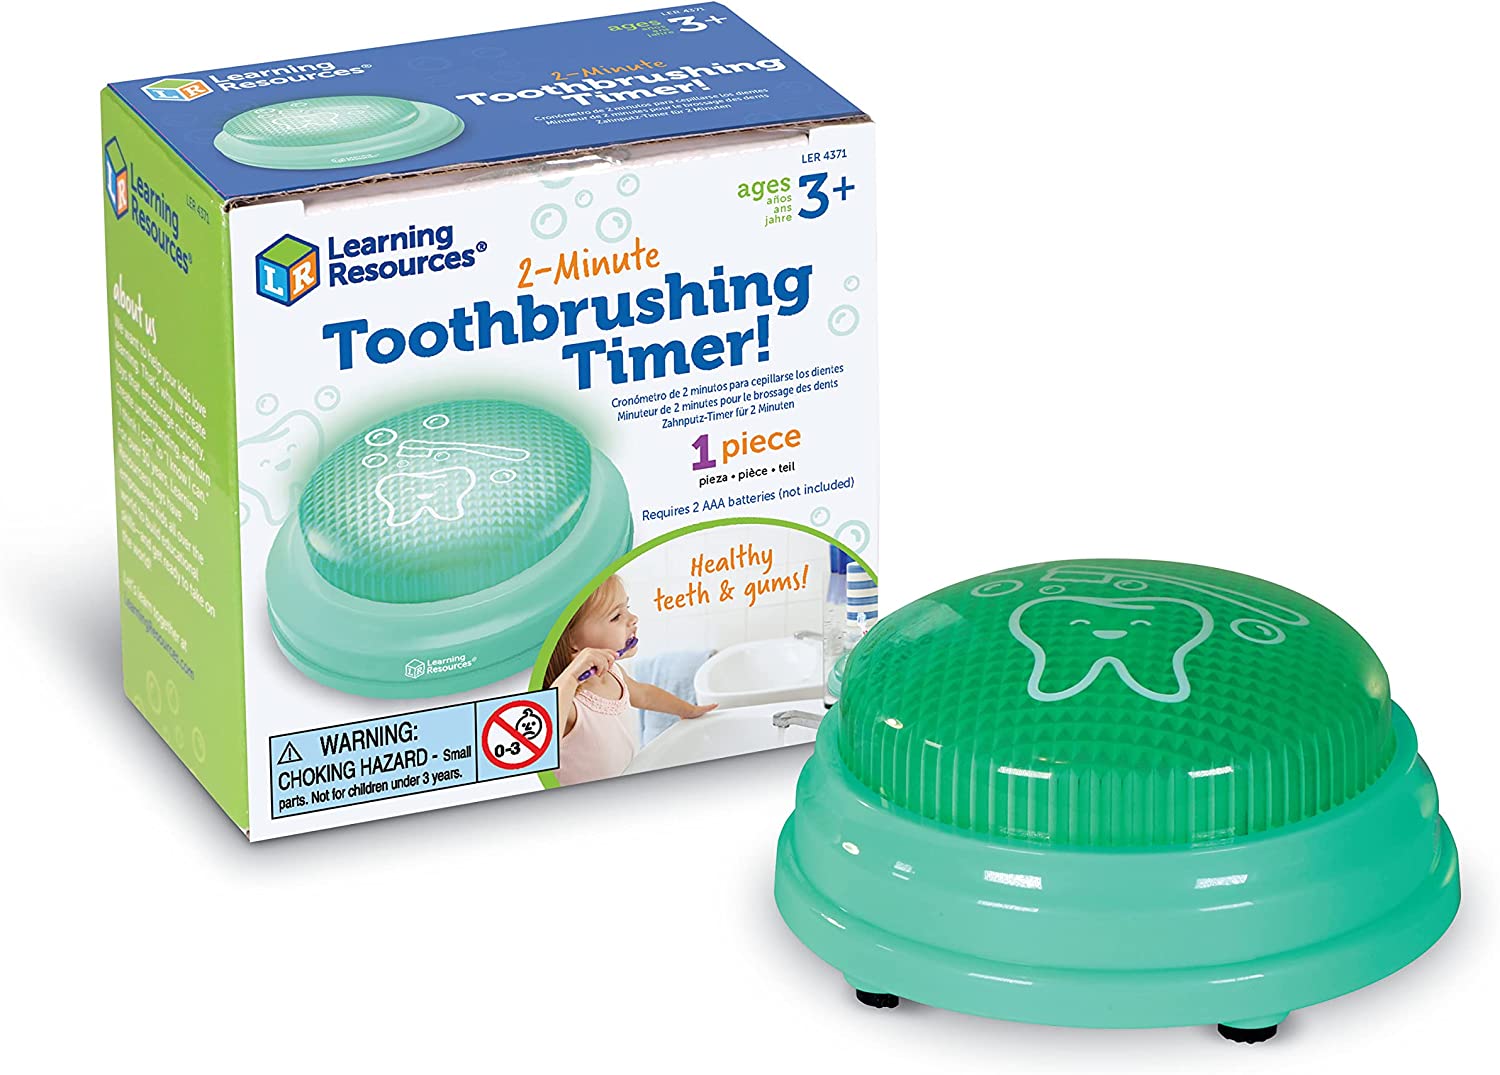 The product package for the Toothbrush Timer next to the Toothbrush Timer.